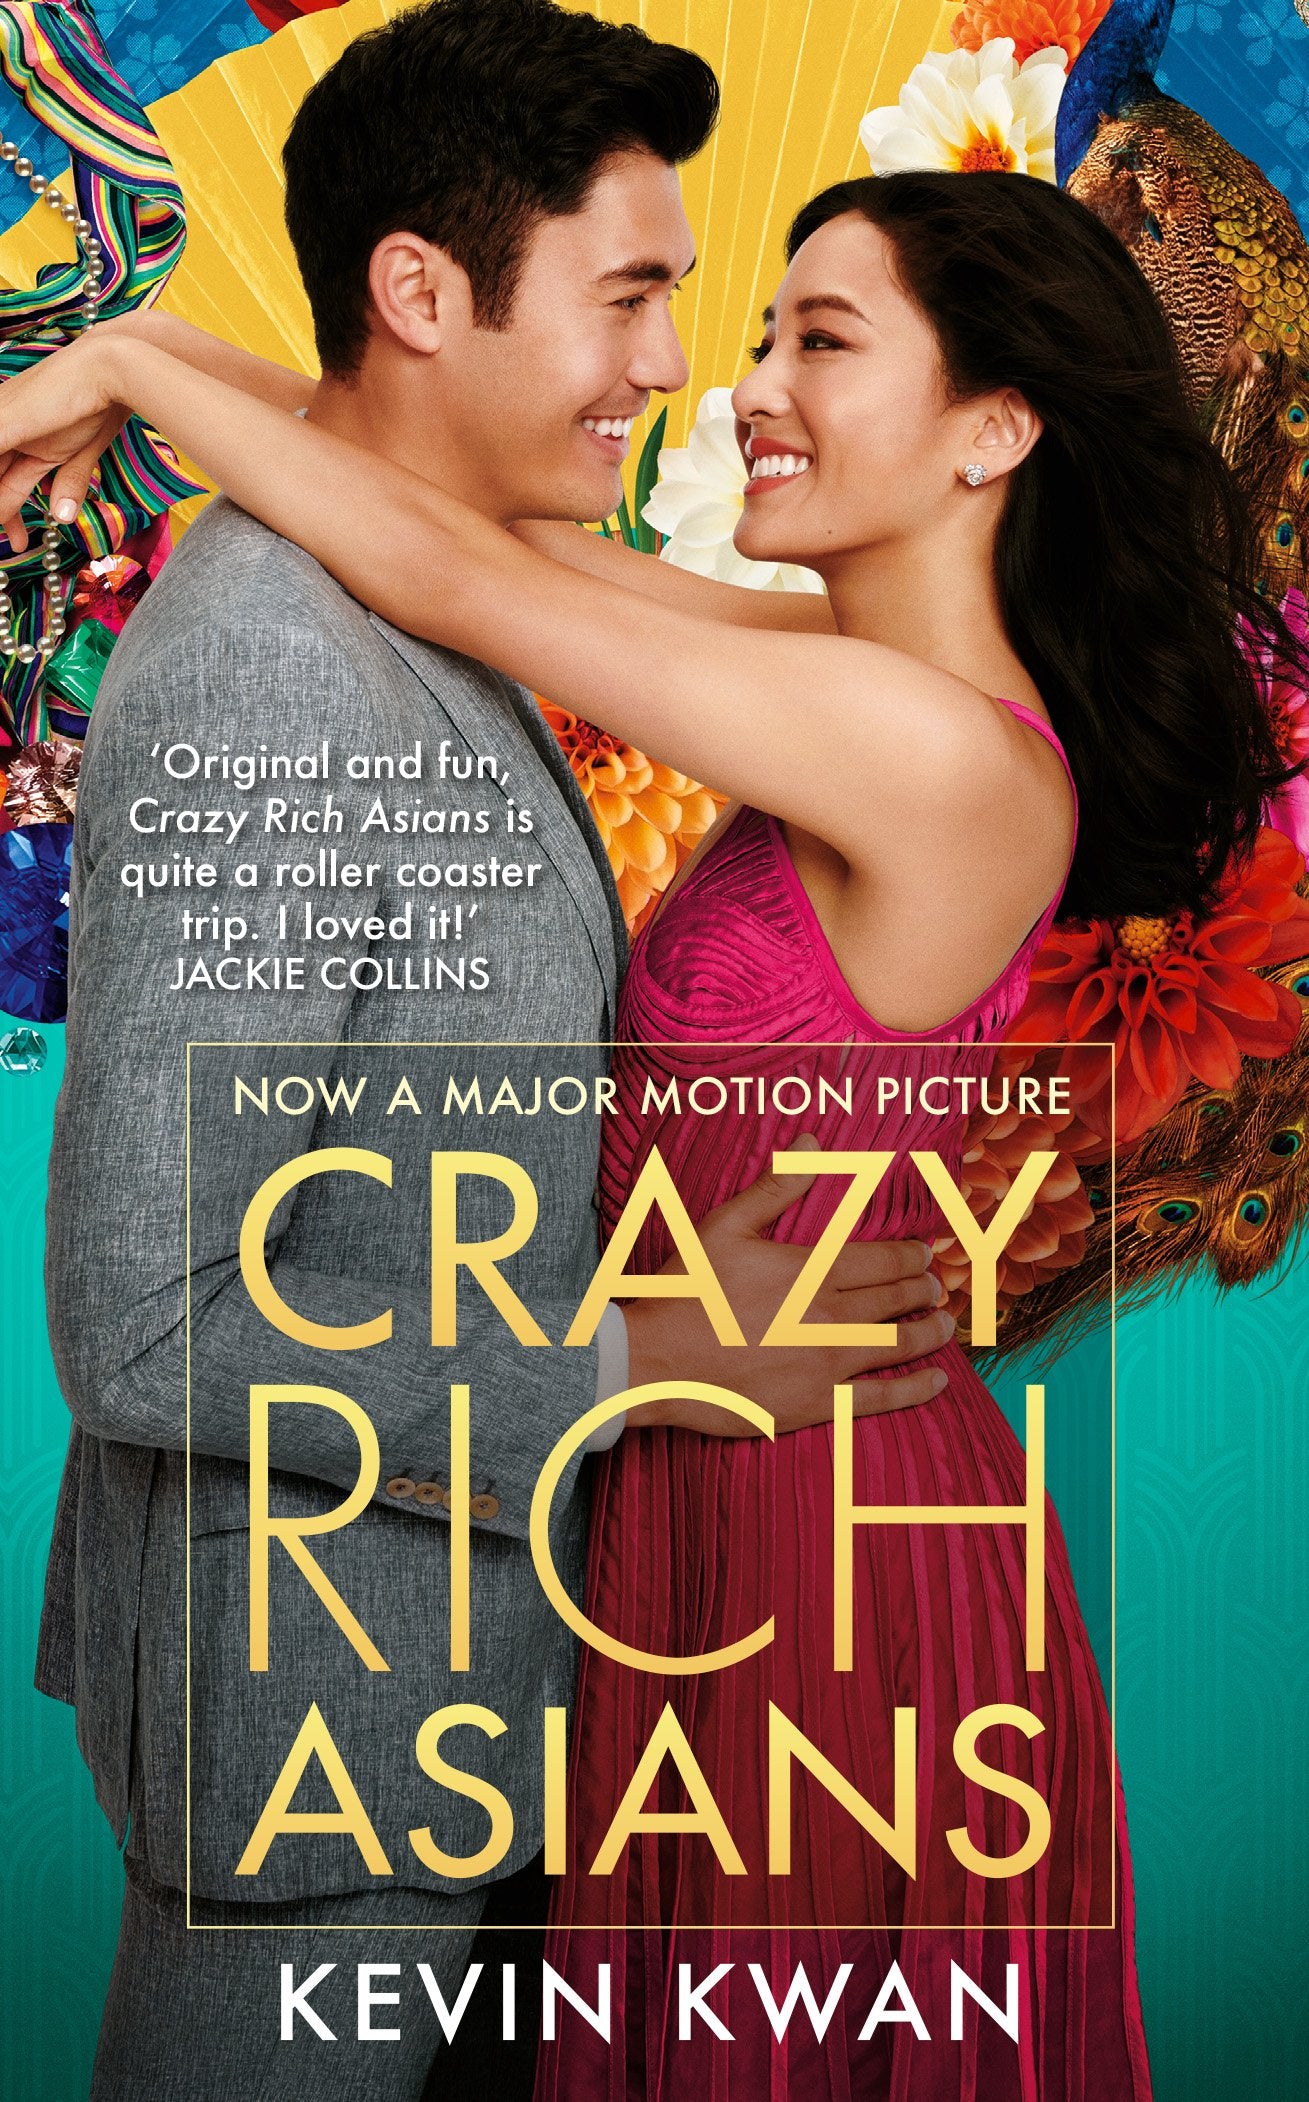 Crazy Rich Asians Potential Release Date, Cast And More | lupon.gov.ph